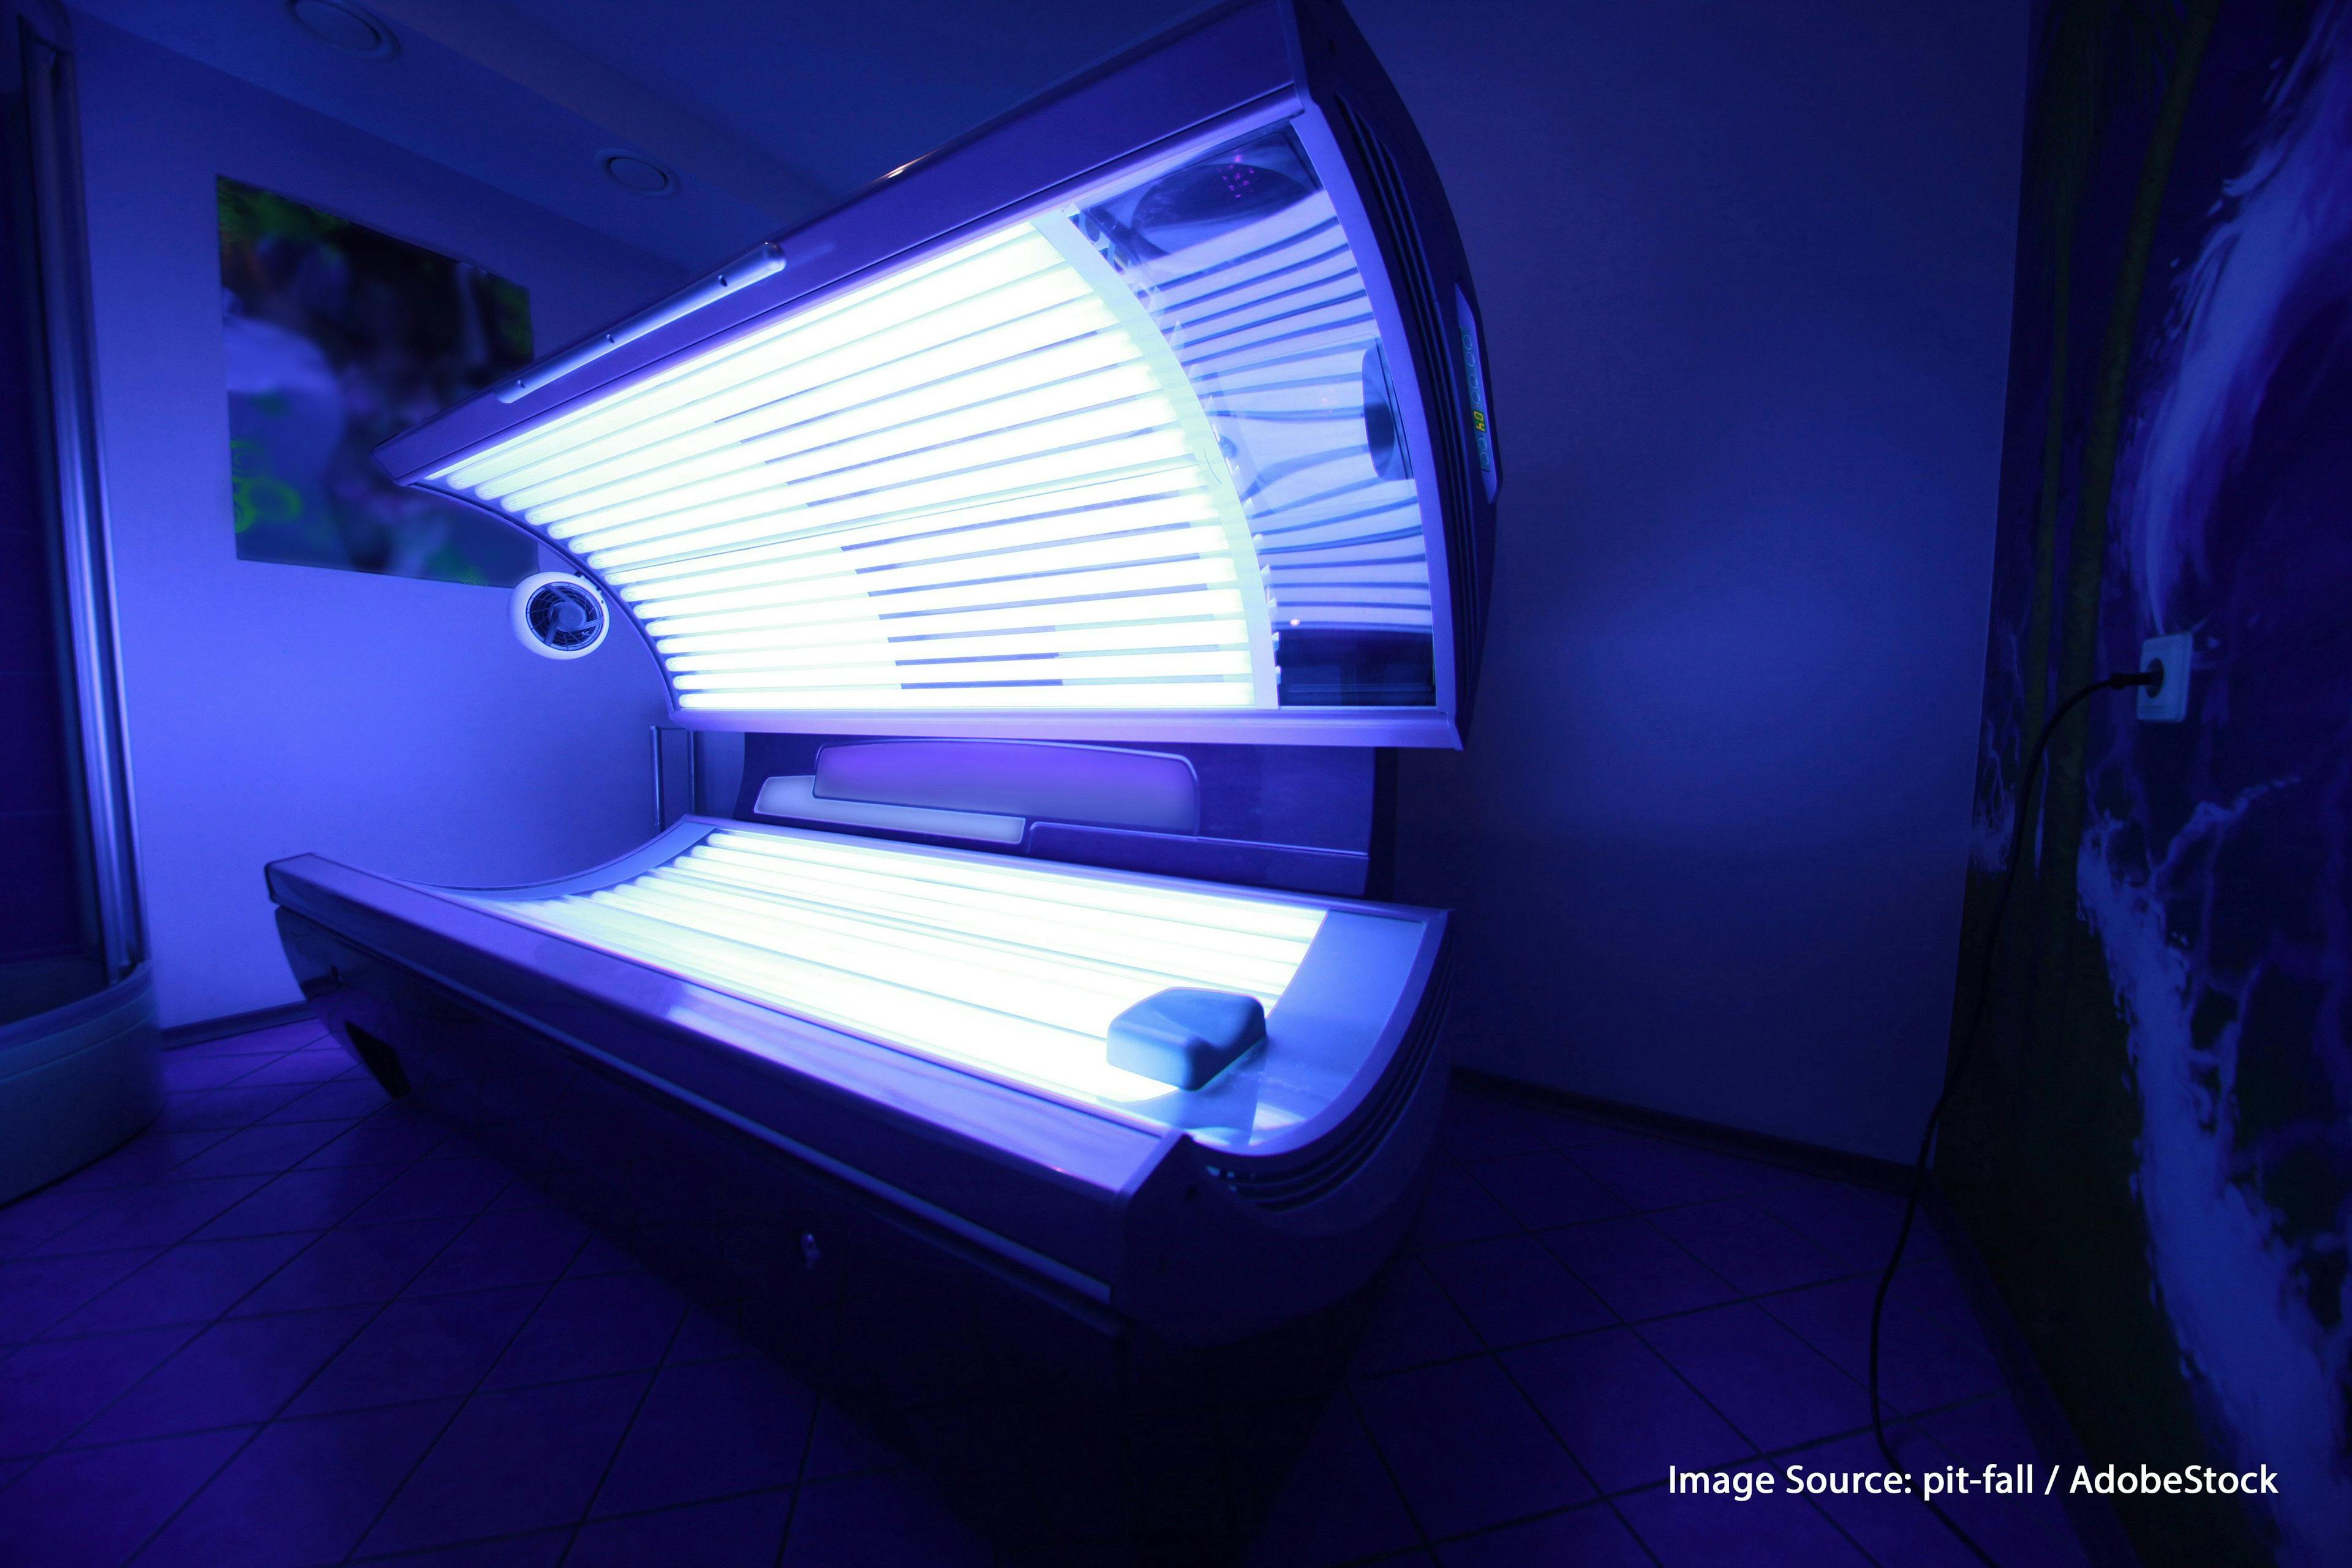 Is Indoor Tanning Linked to Melanoma and Non-Melanoma Skin Cancers?